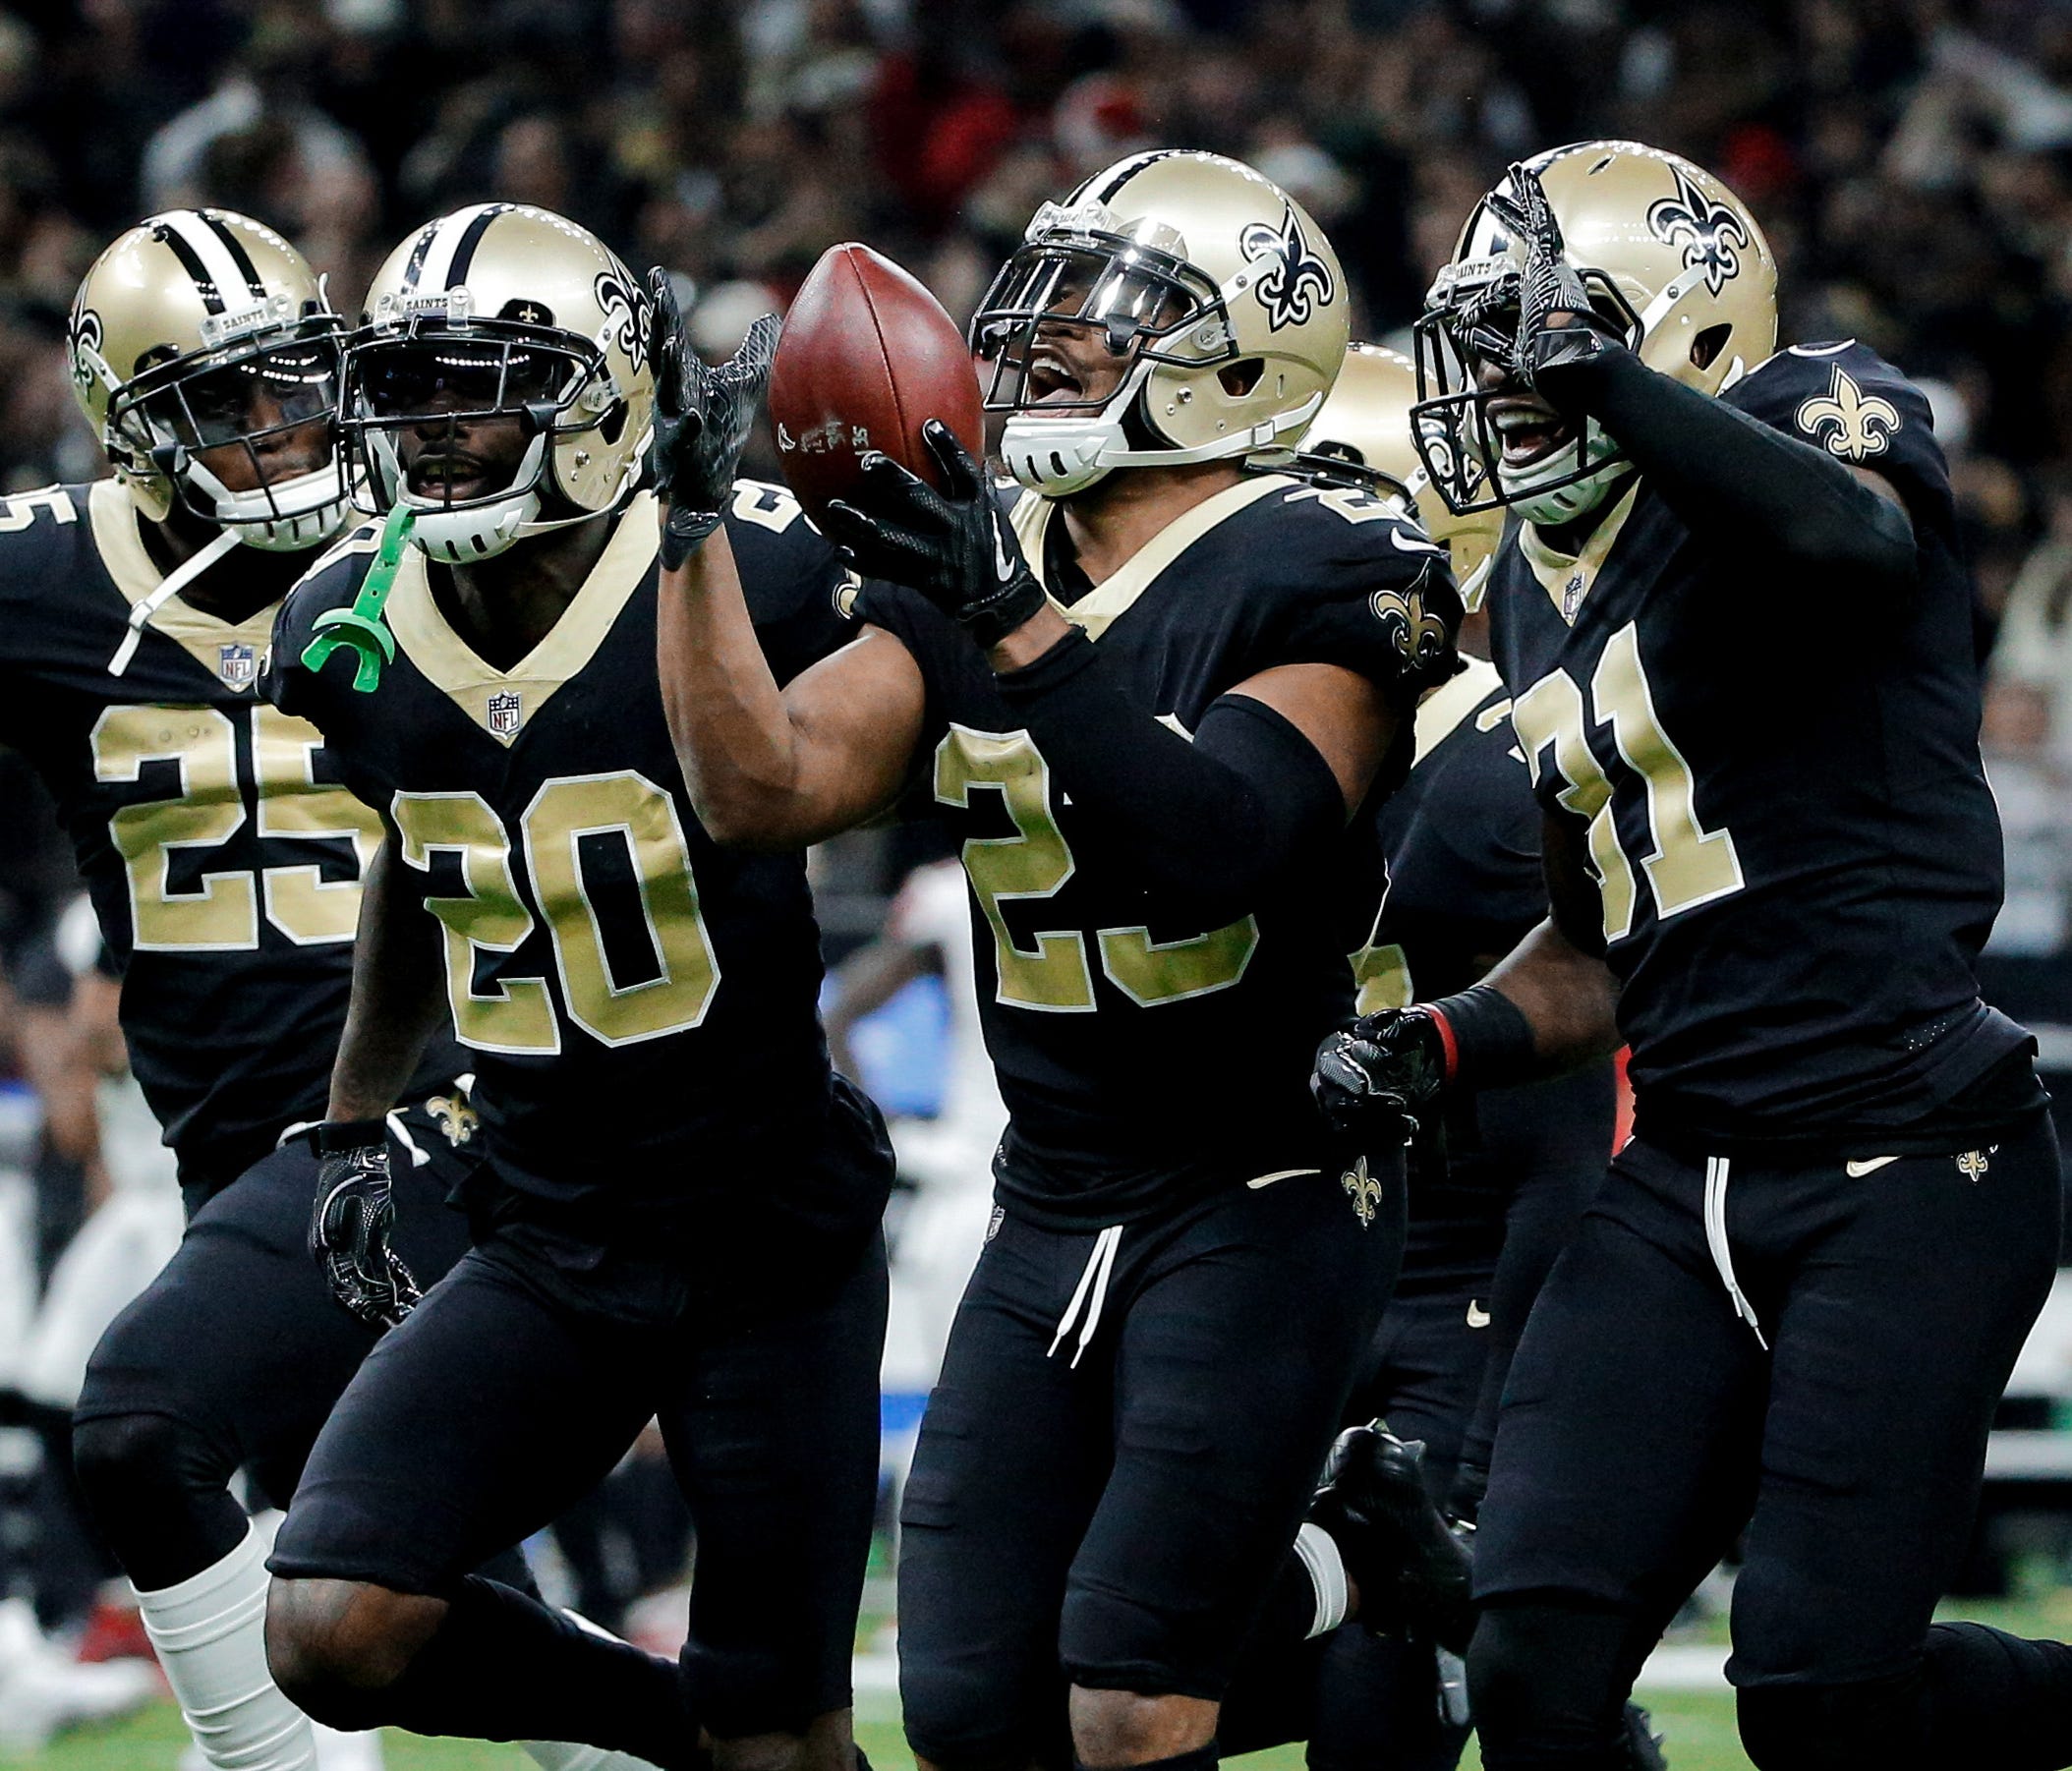 New Orleans Saints cornerback Marshon Lattimore (23) celebrates with teammates after a interception against the Atlanta Falcons during the second quarter at the Mercedes-Benz Superdome.